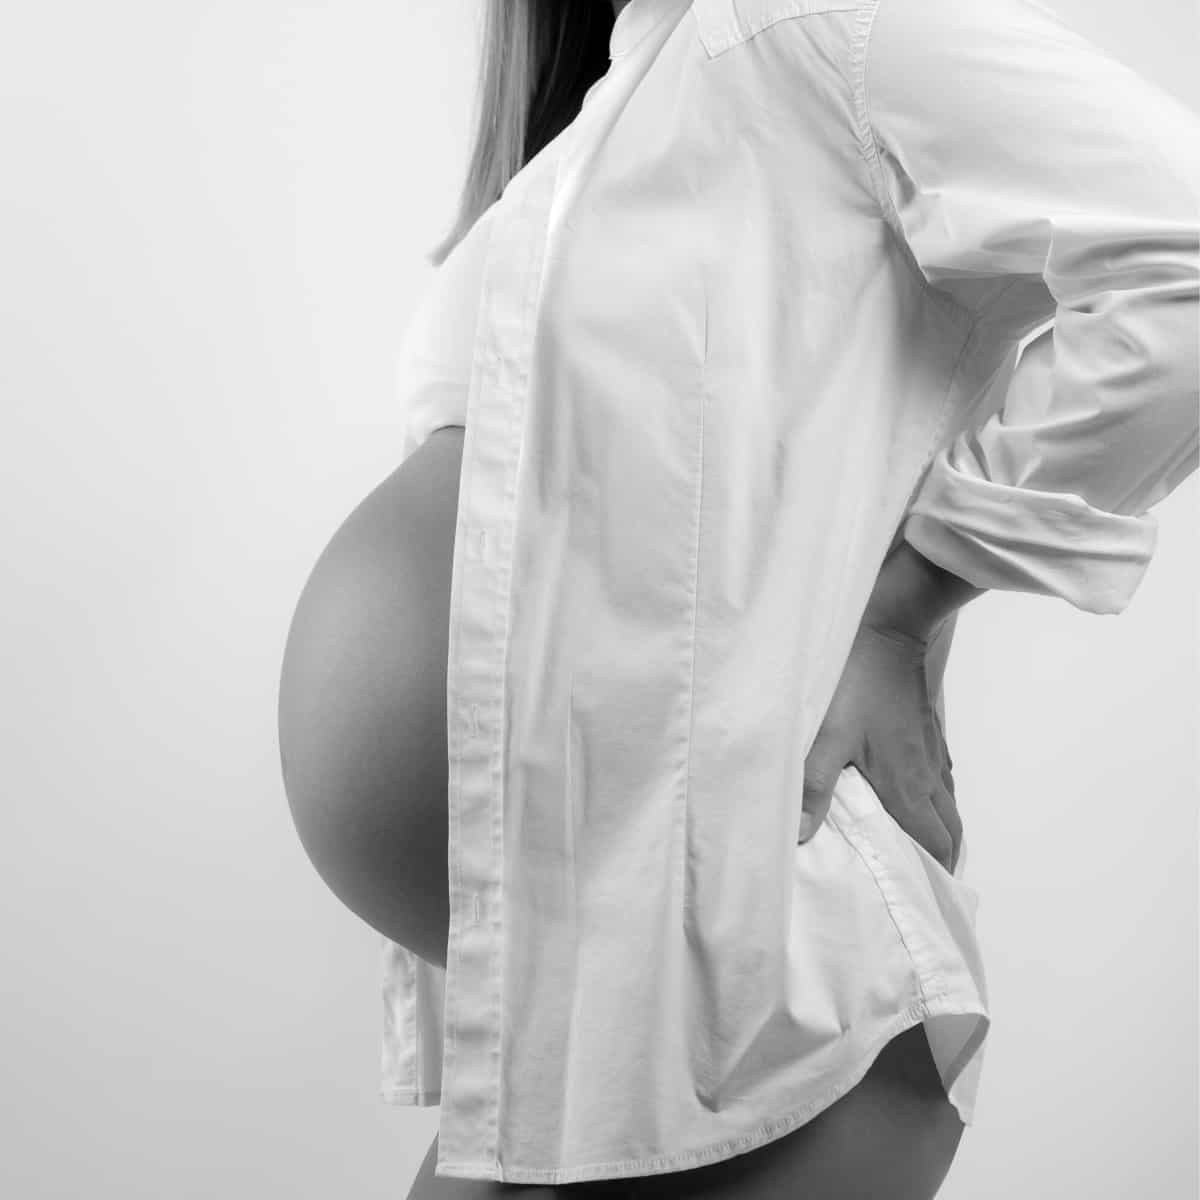 silhouette-of-pregnant-belly-with-white-shirt-draped-down-sides